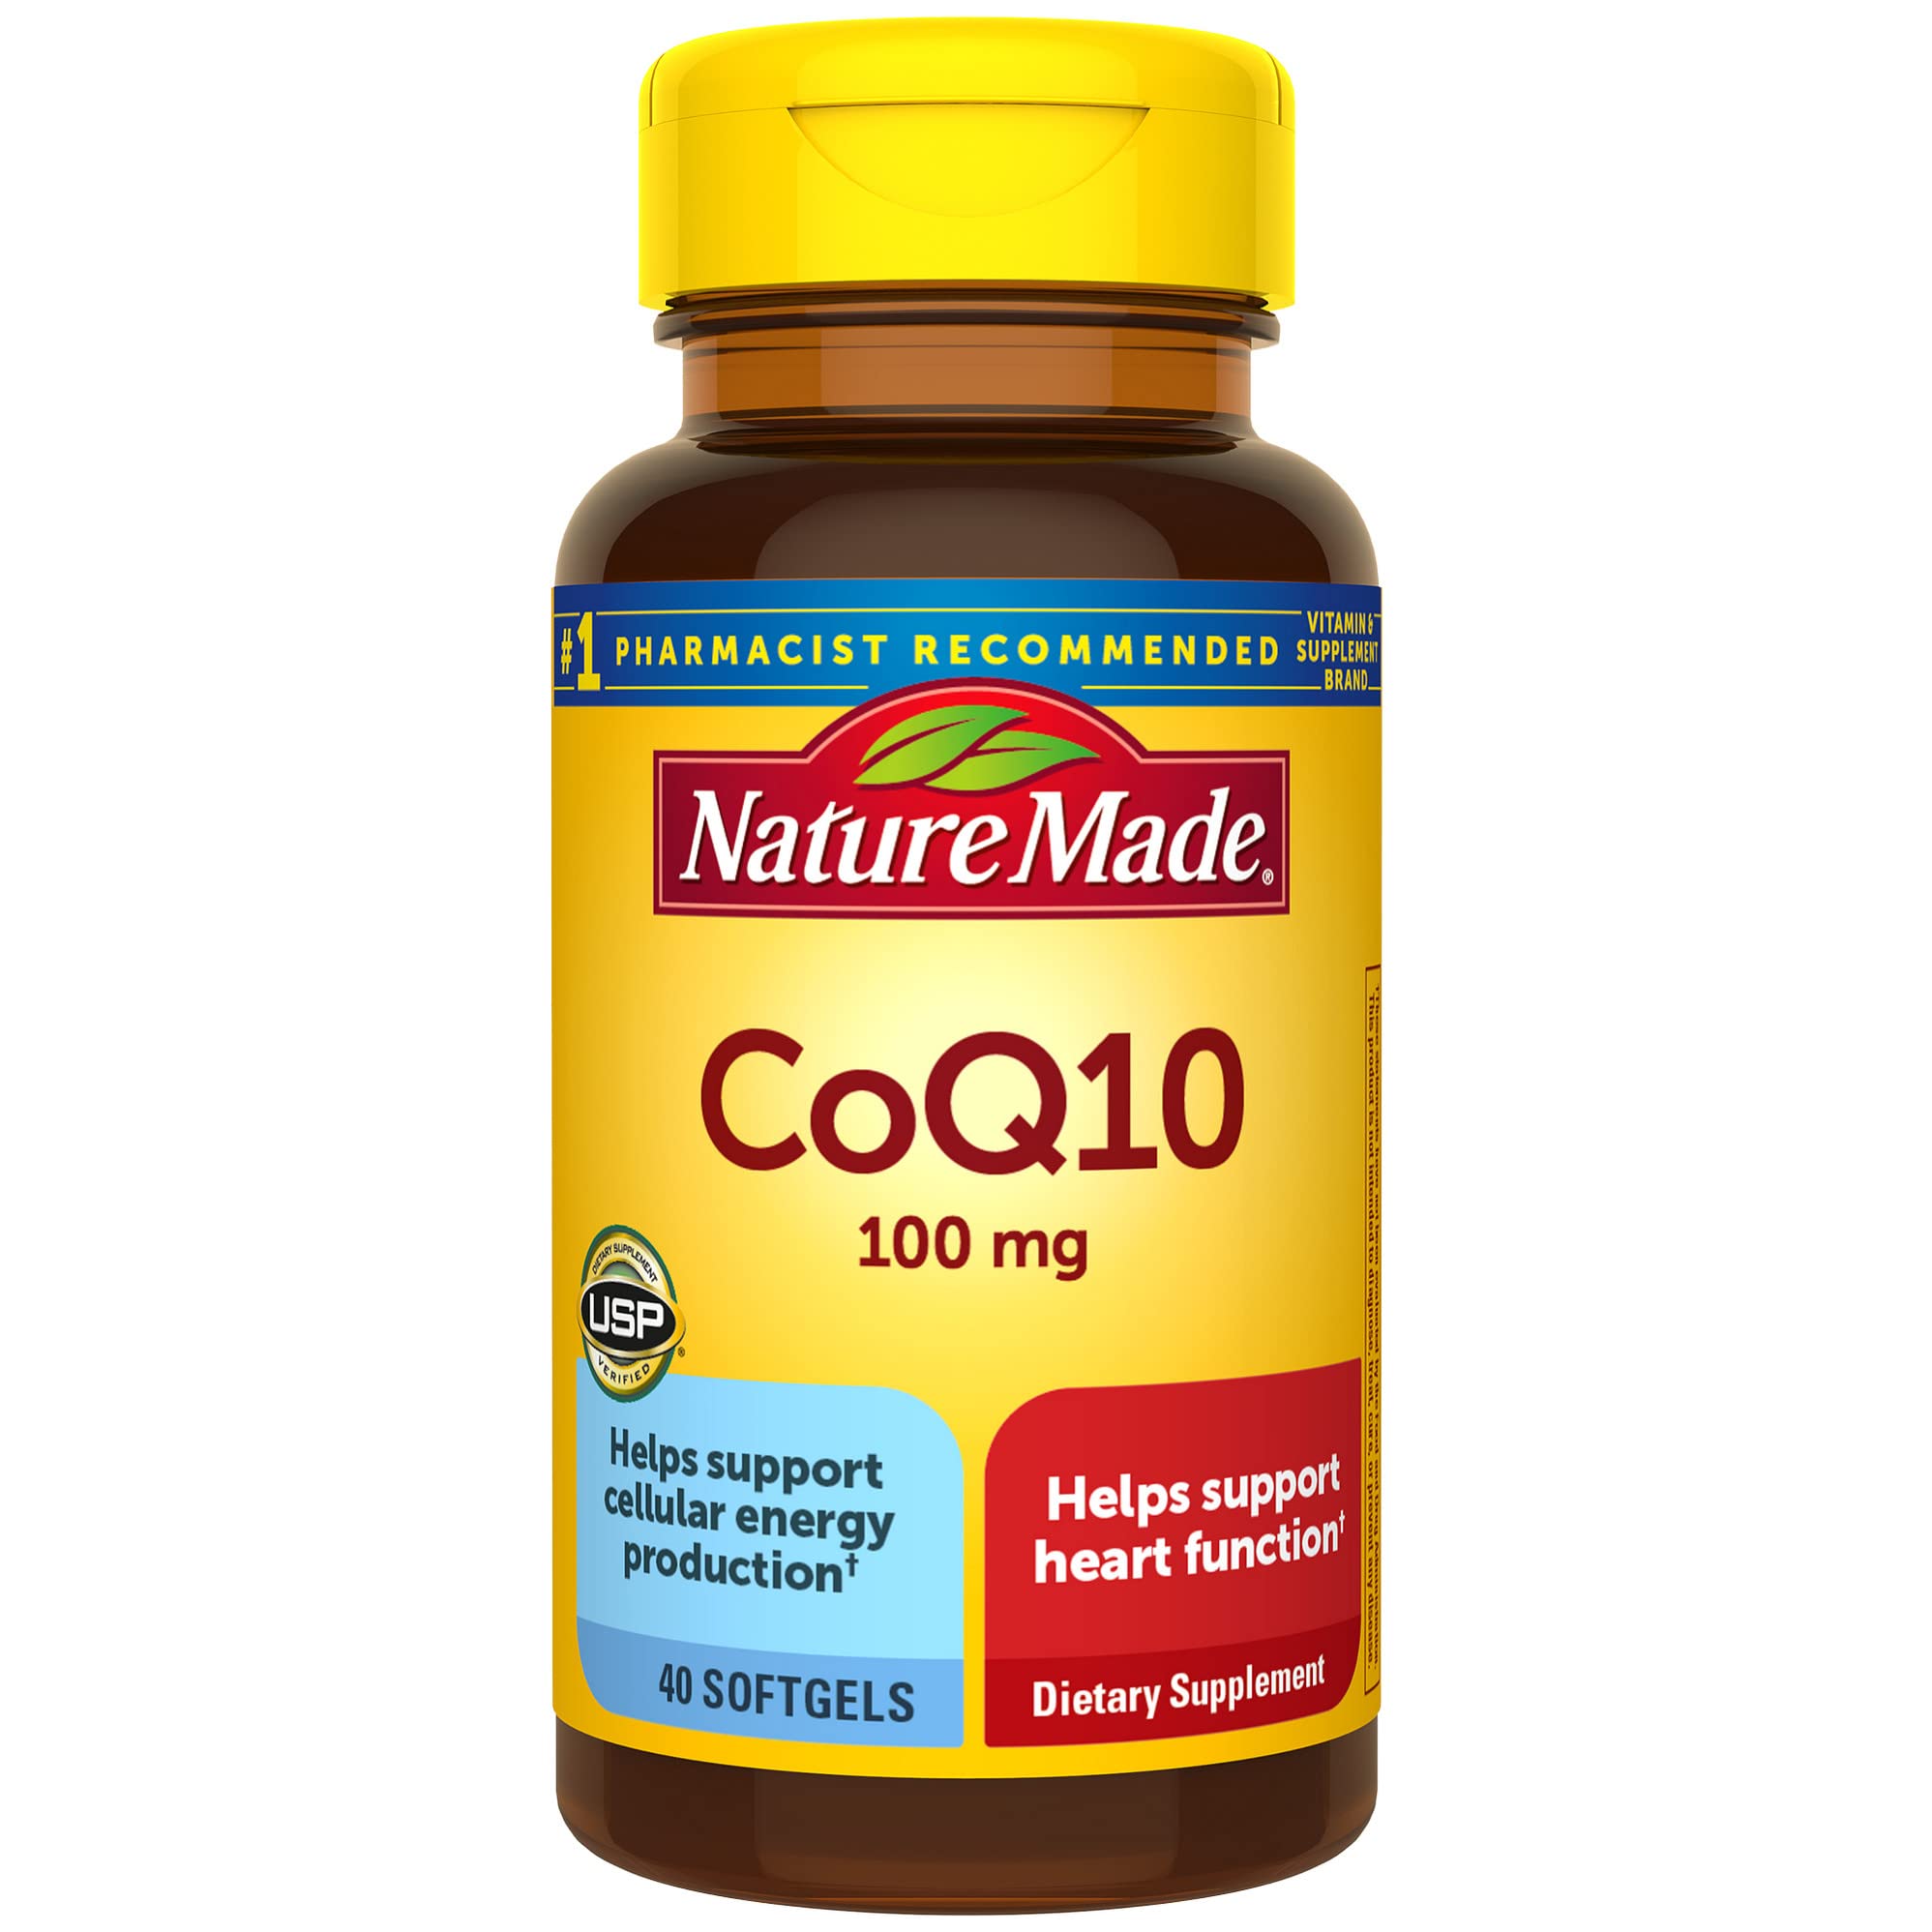 Nature Made CoQ10 100 mg, Dietary Supplement for Heart Health Support, 40 Softgels, 40 Day Supply